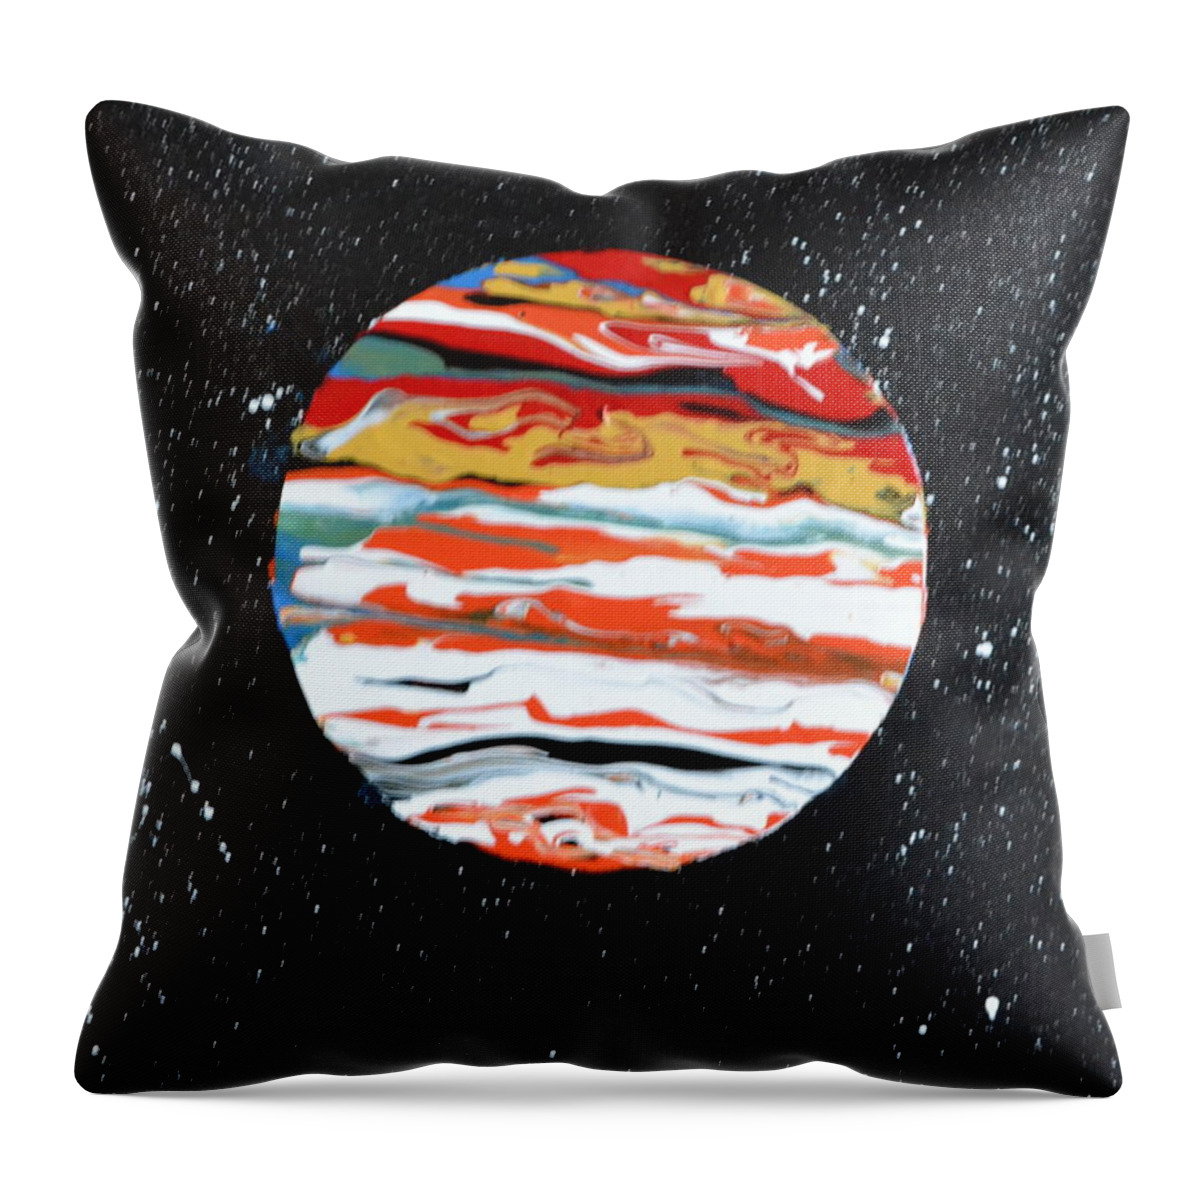 This Is A Abstract Painting Of The Planet Jupiter. The Flow Technique Was Used With Acrylic Colors. The Five Acrylic Colors Used Were Poured In A Circle Area Tilted To Get This Affect. The Distant White Stars Were Also Included In This Painting. Throw Pillow featuring the painting Jupiter by Martin Schmidt